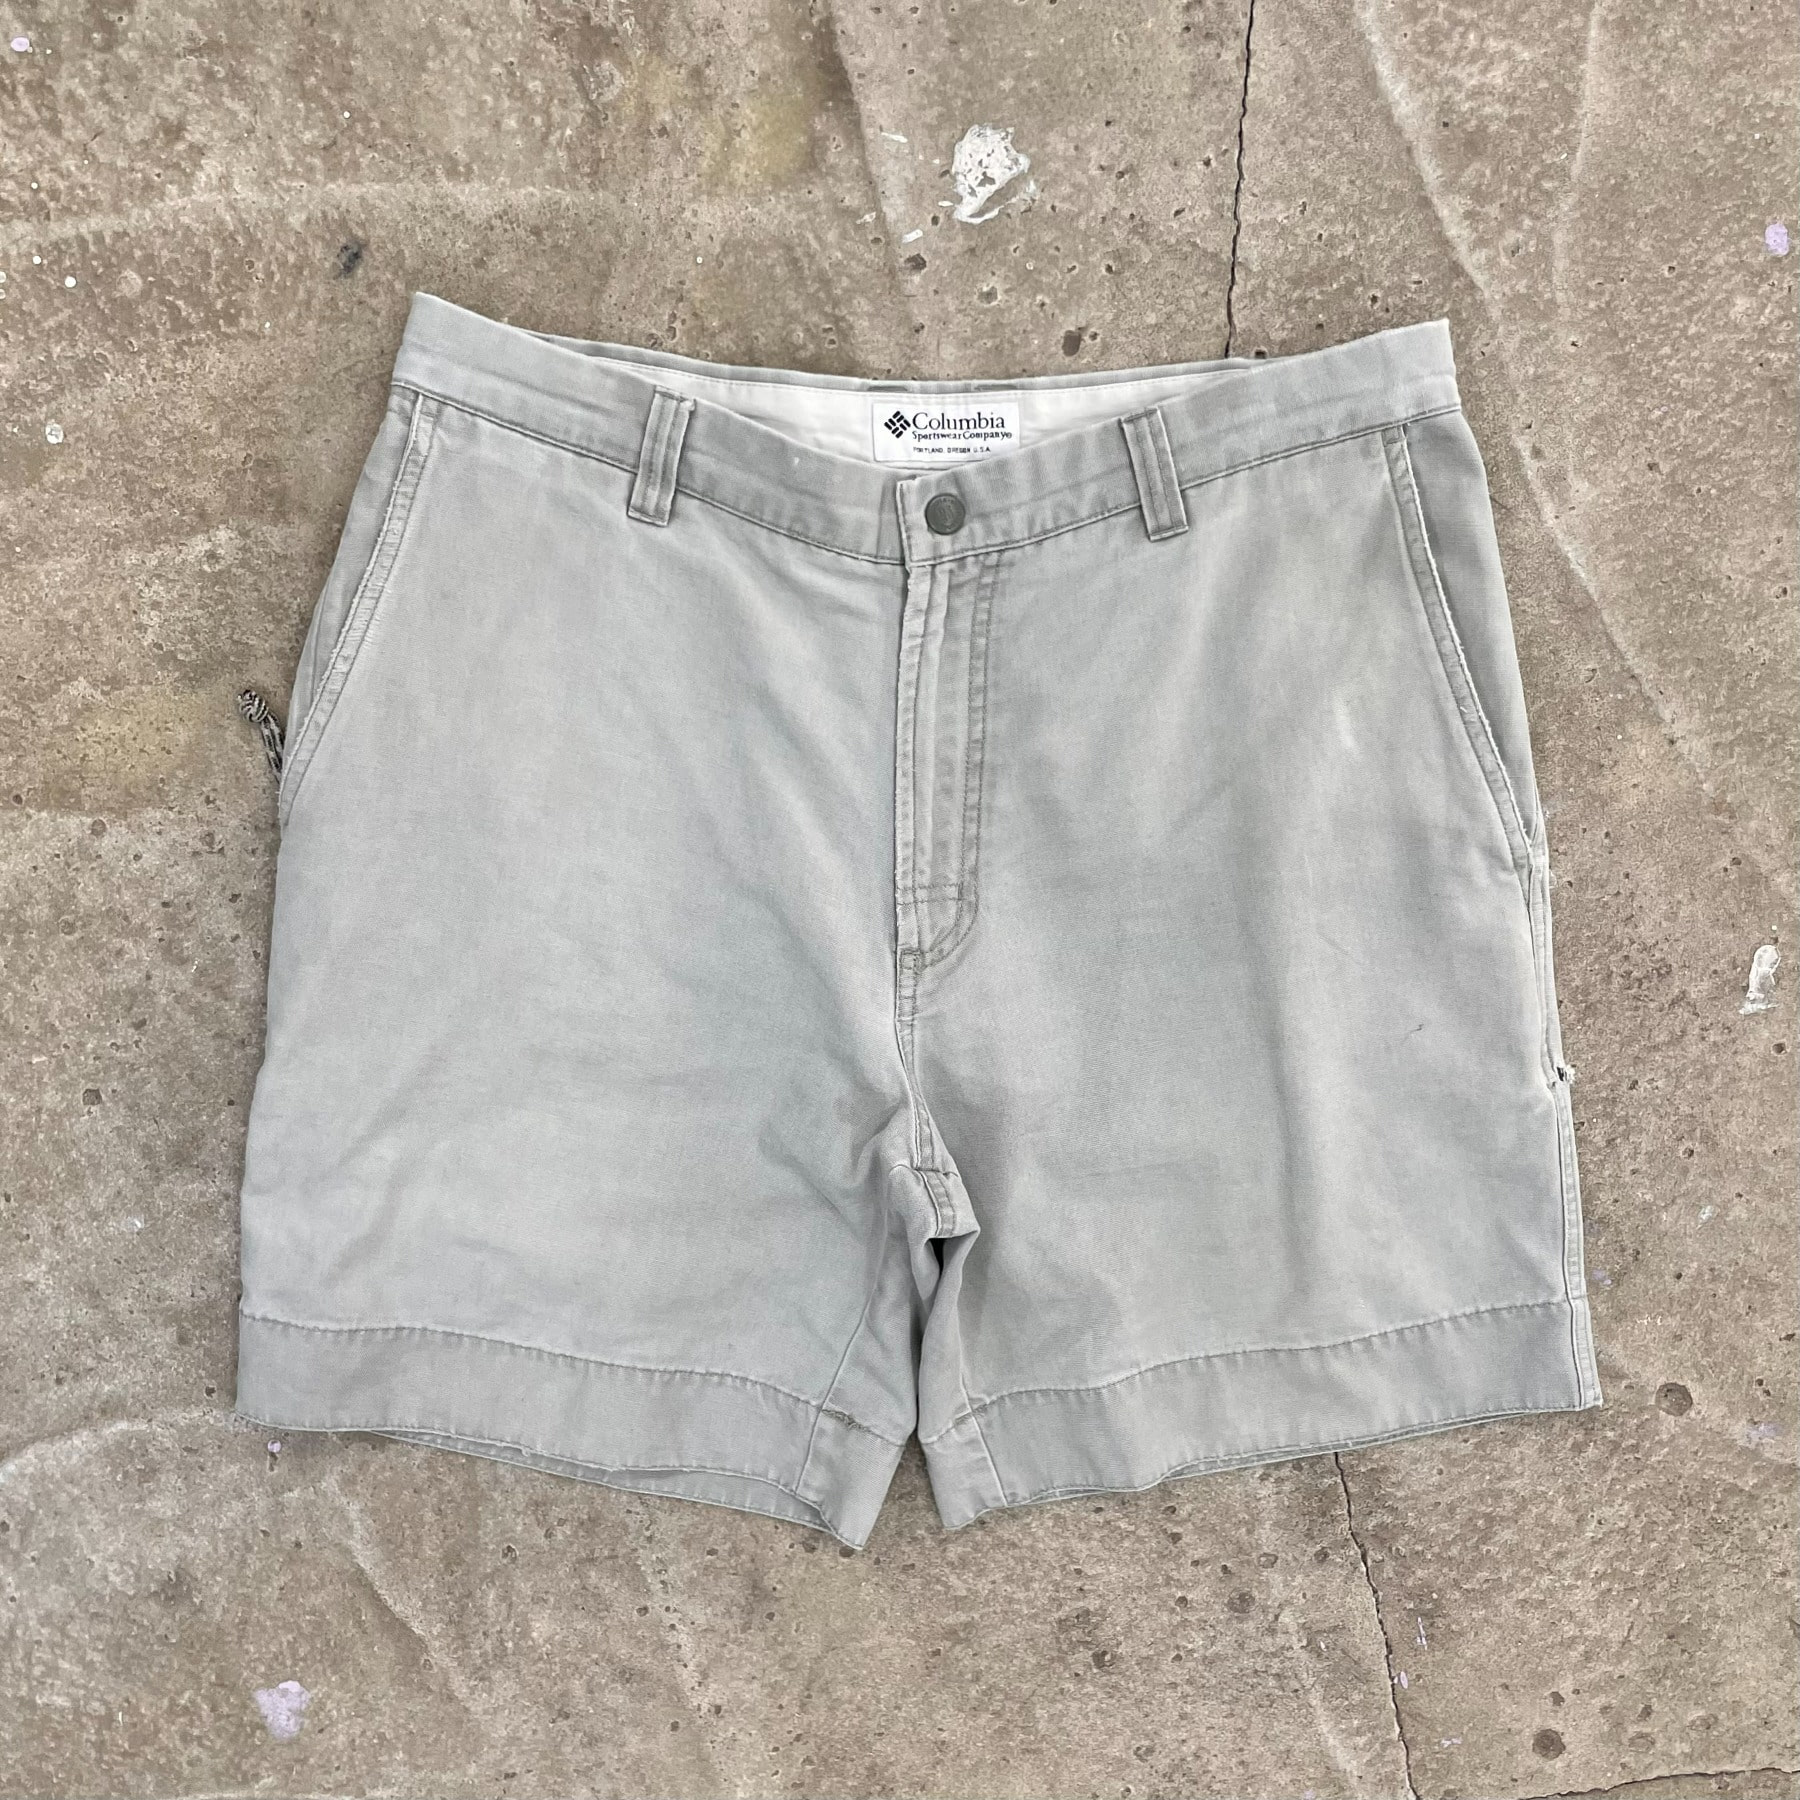 00&#039;s Columbia Cotton Shorts - 34inch